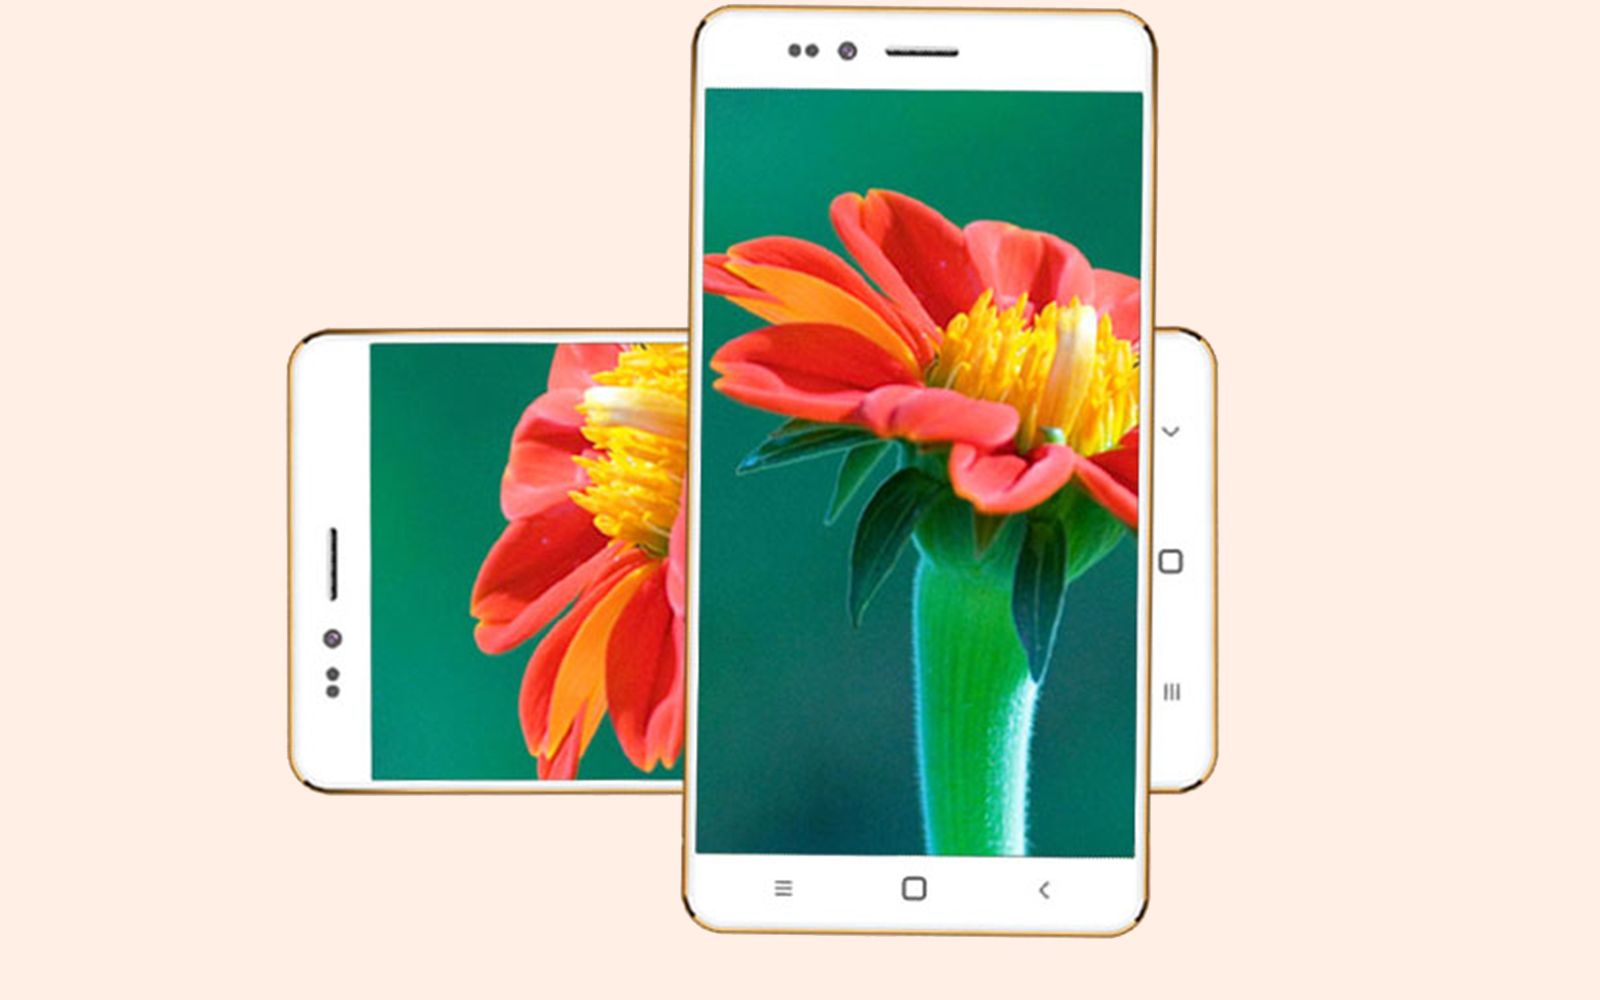 freedom 251 this is the world’s cheapest smartphone at 2 50 and it’s actually good image 1